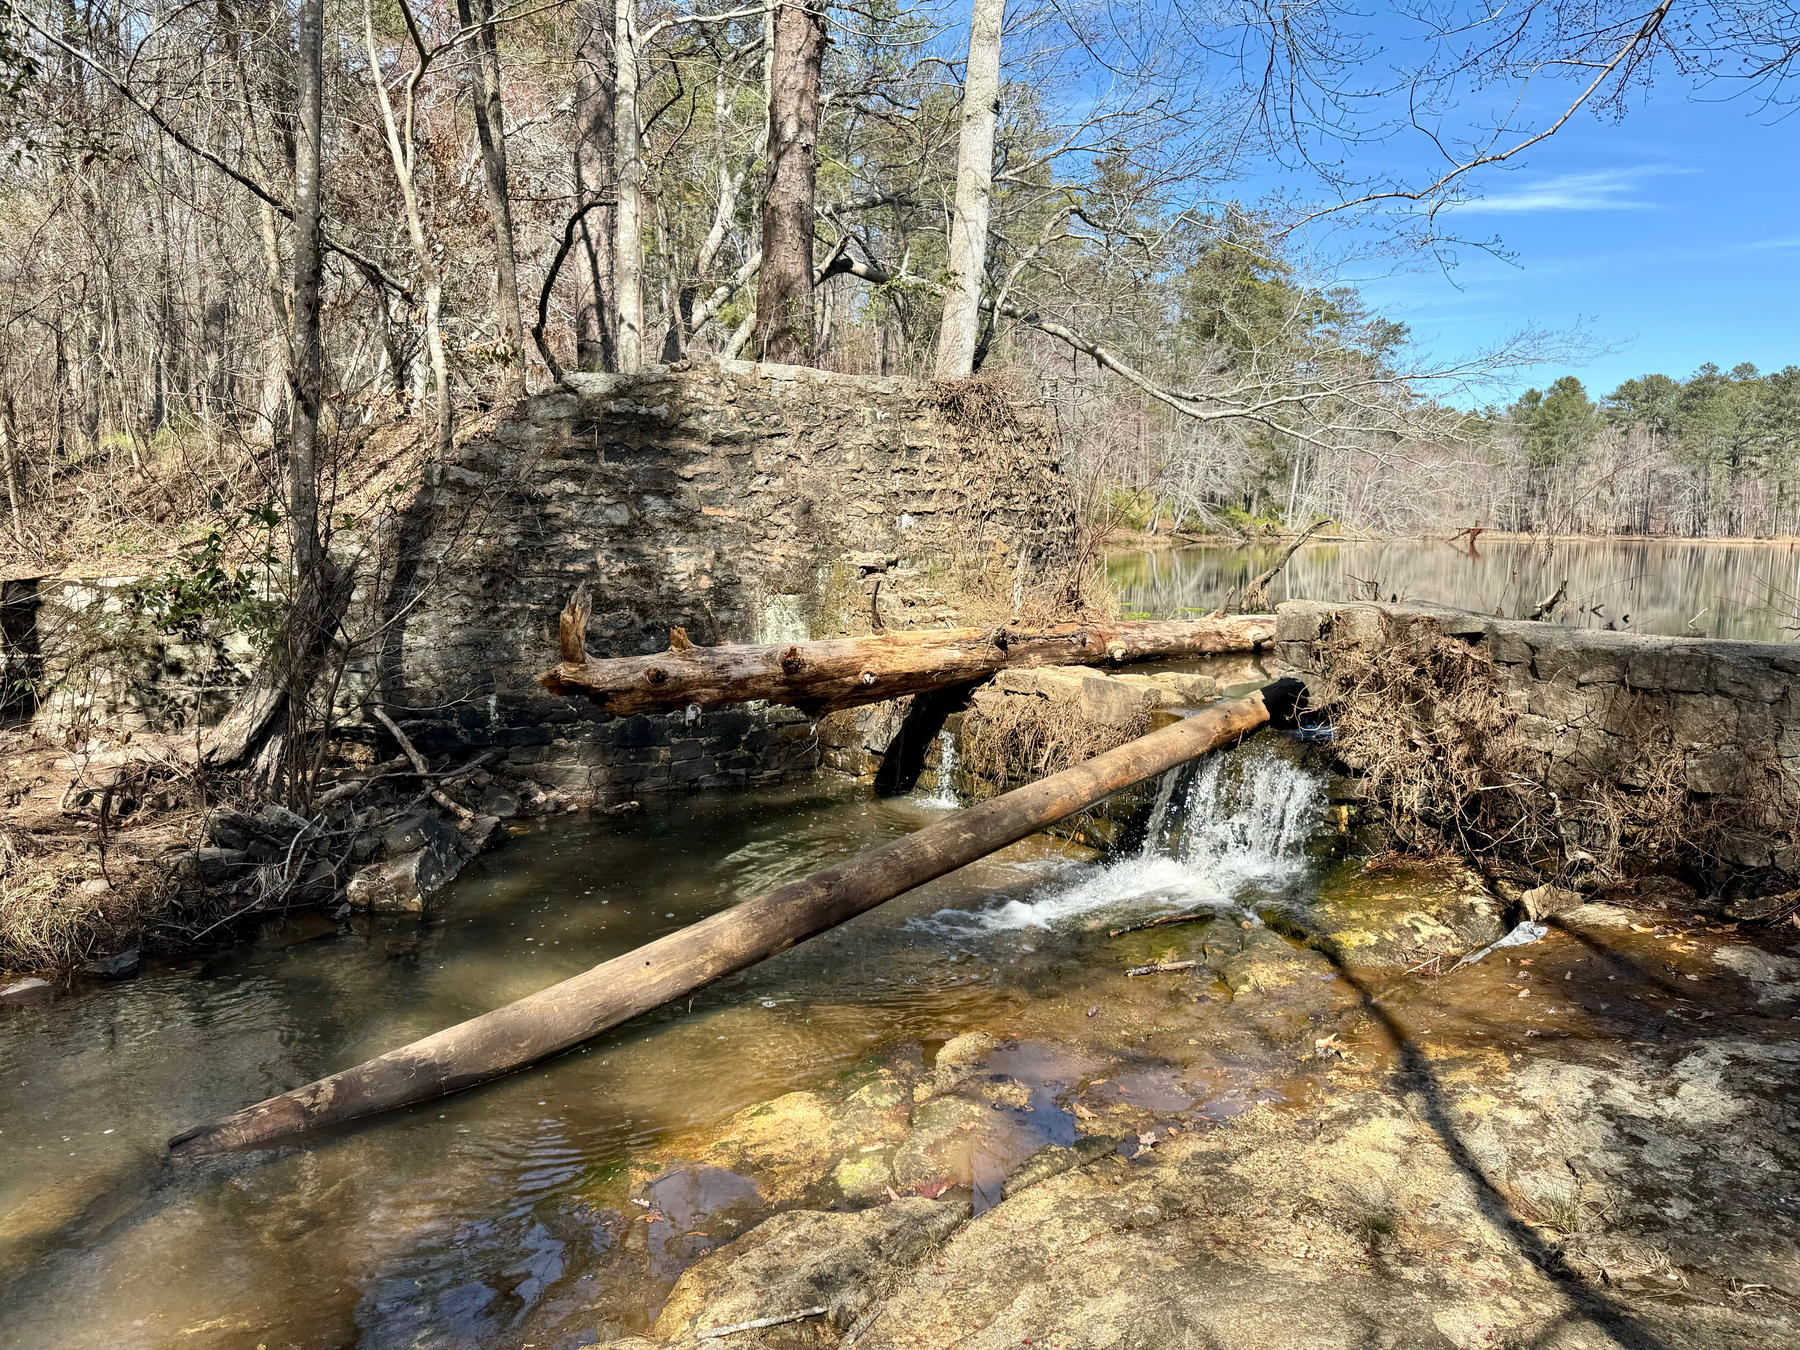 A small waterfall flowing from a forest creek through a stone wall, with fallen logs and bare trees surrounding it, reflecting a clear blue sky above.